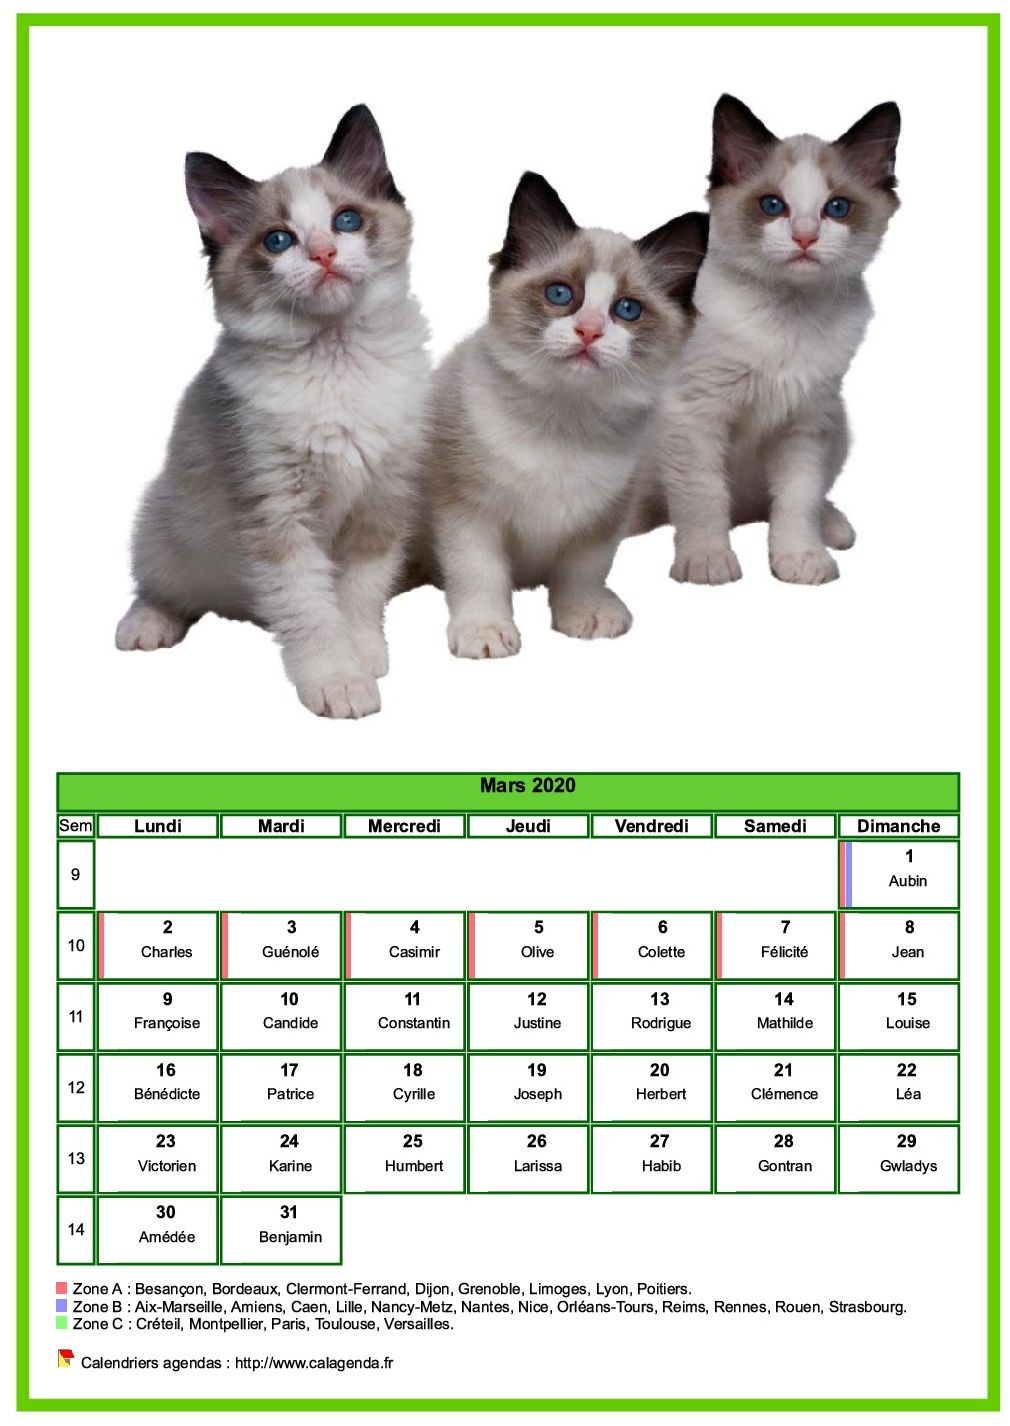 Calendrier mars 2020 chats